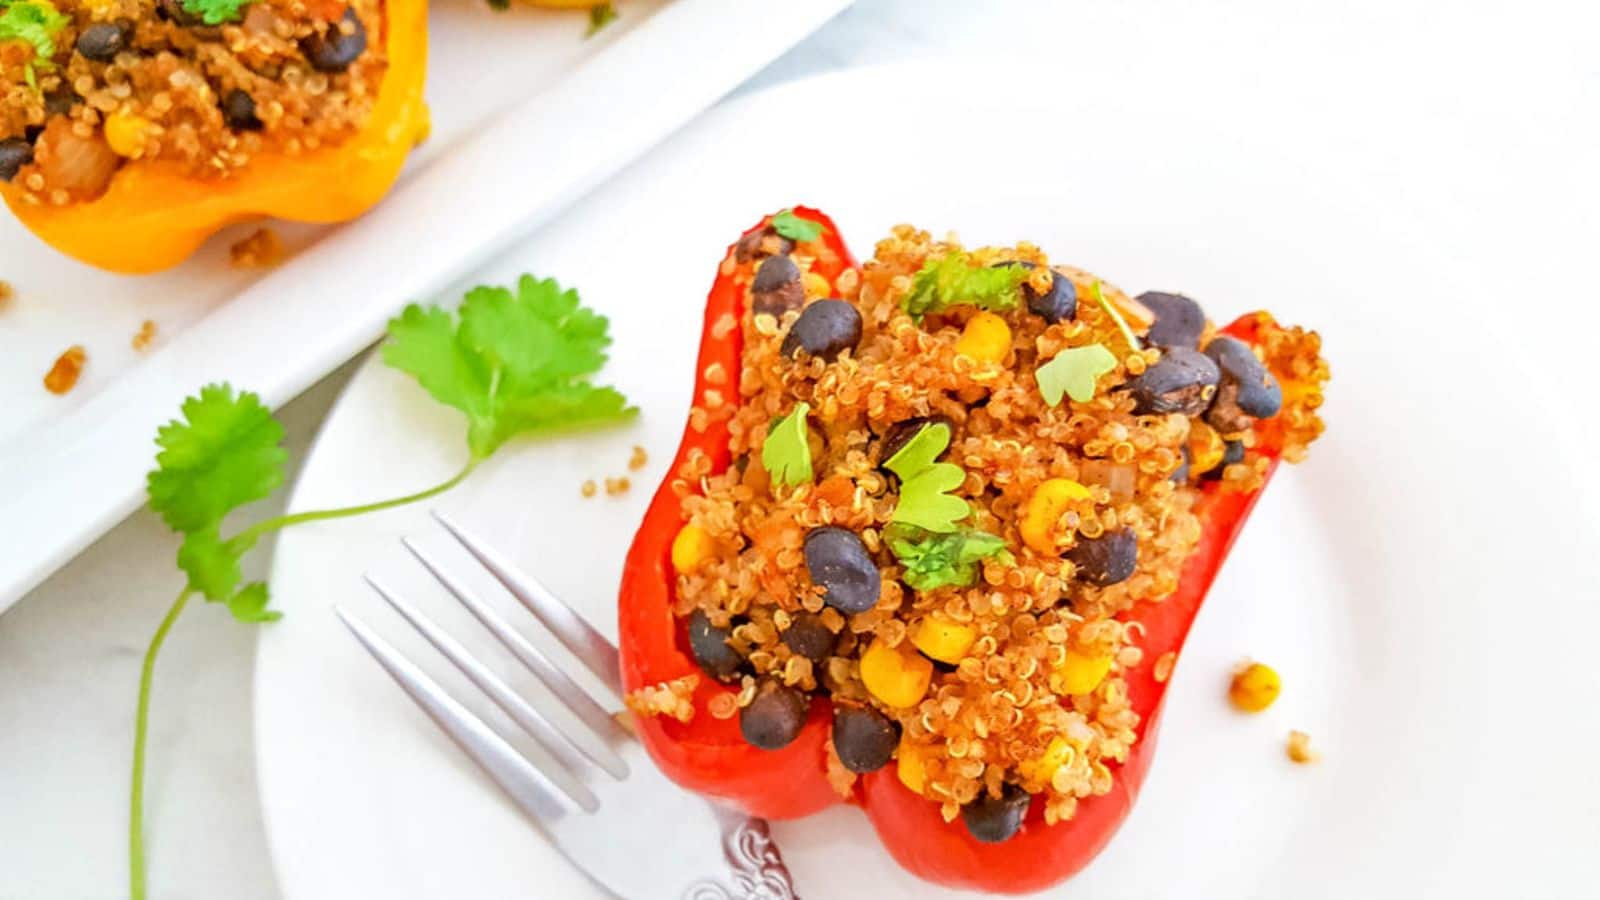 Mexico on your plate: Cook quinoa stuffed peppers